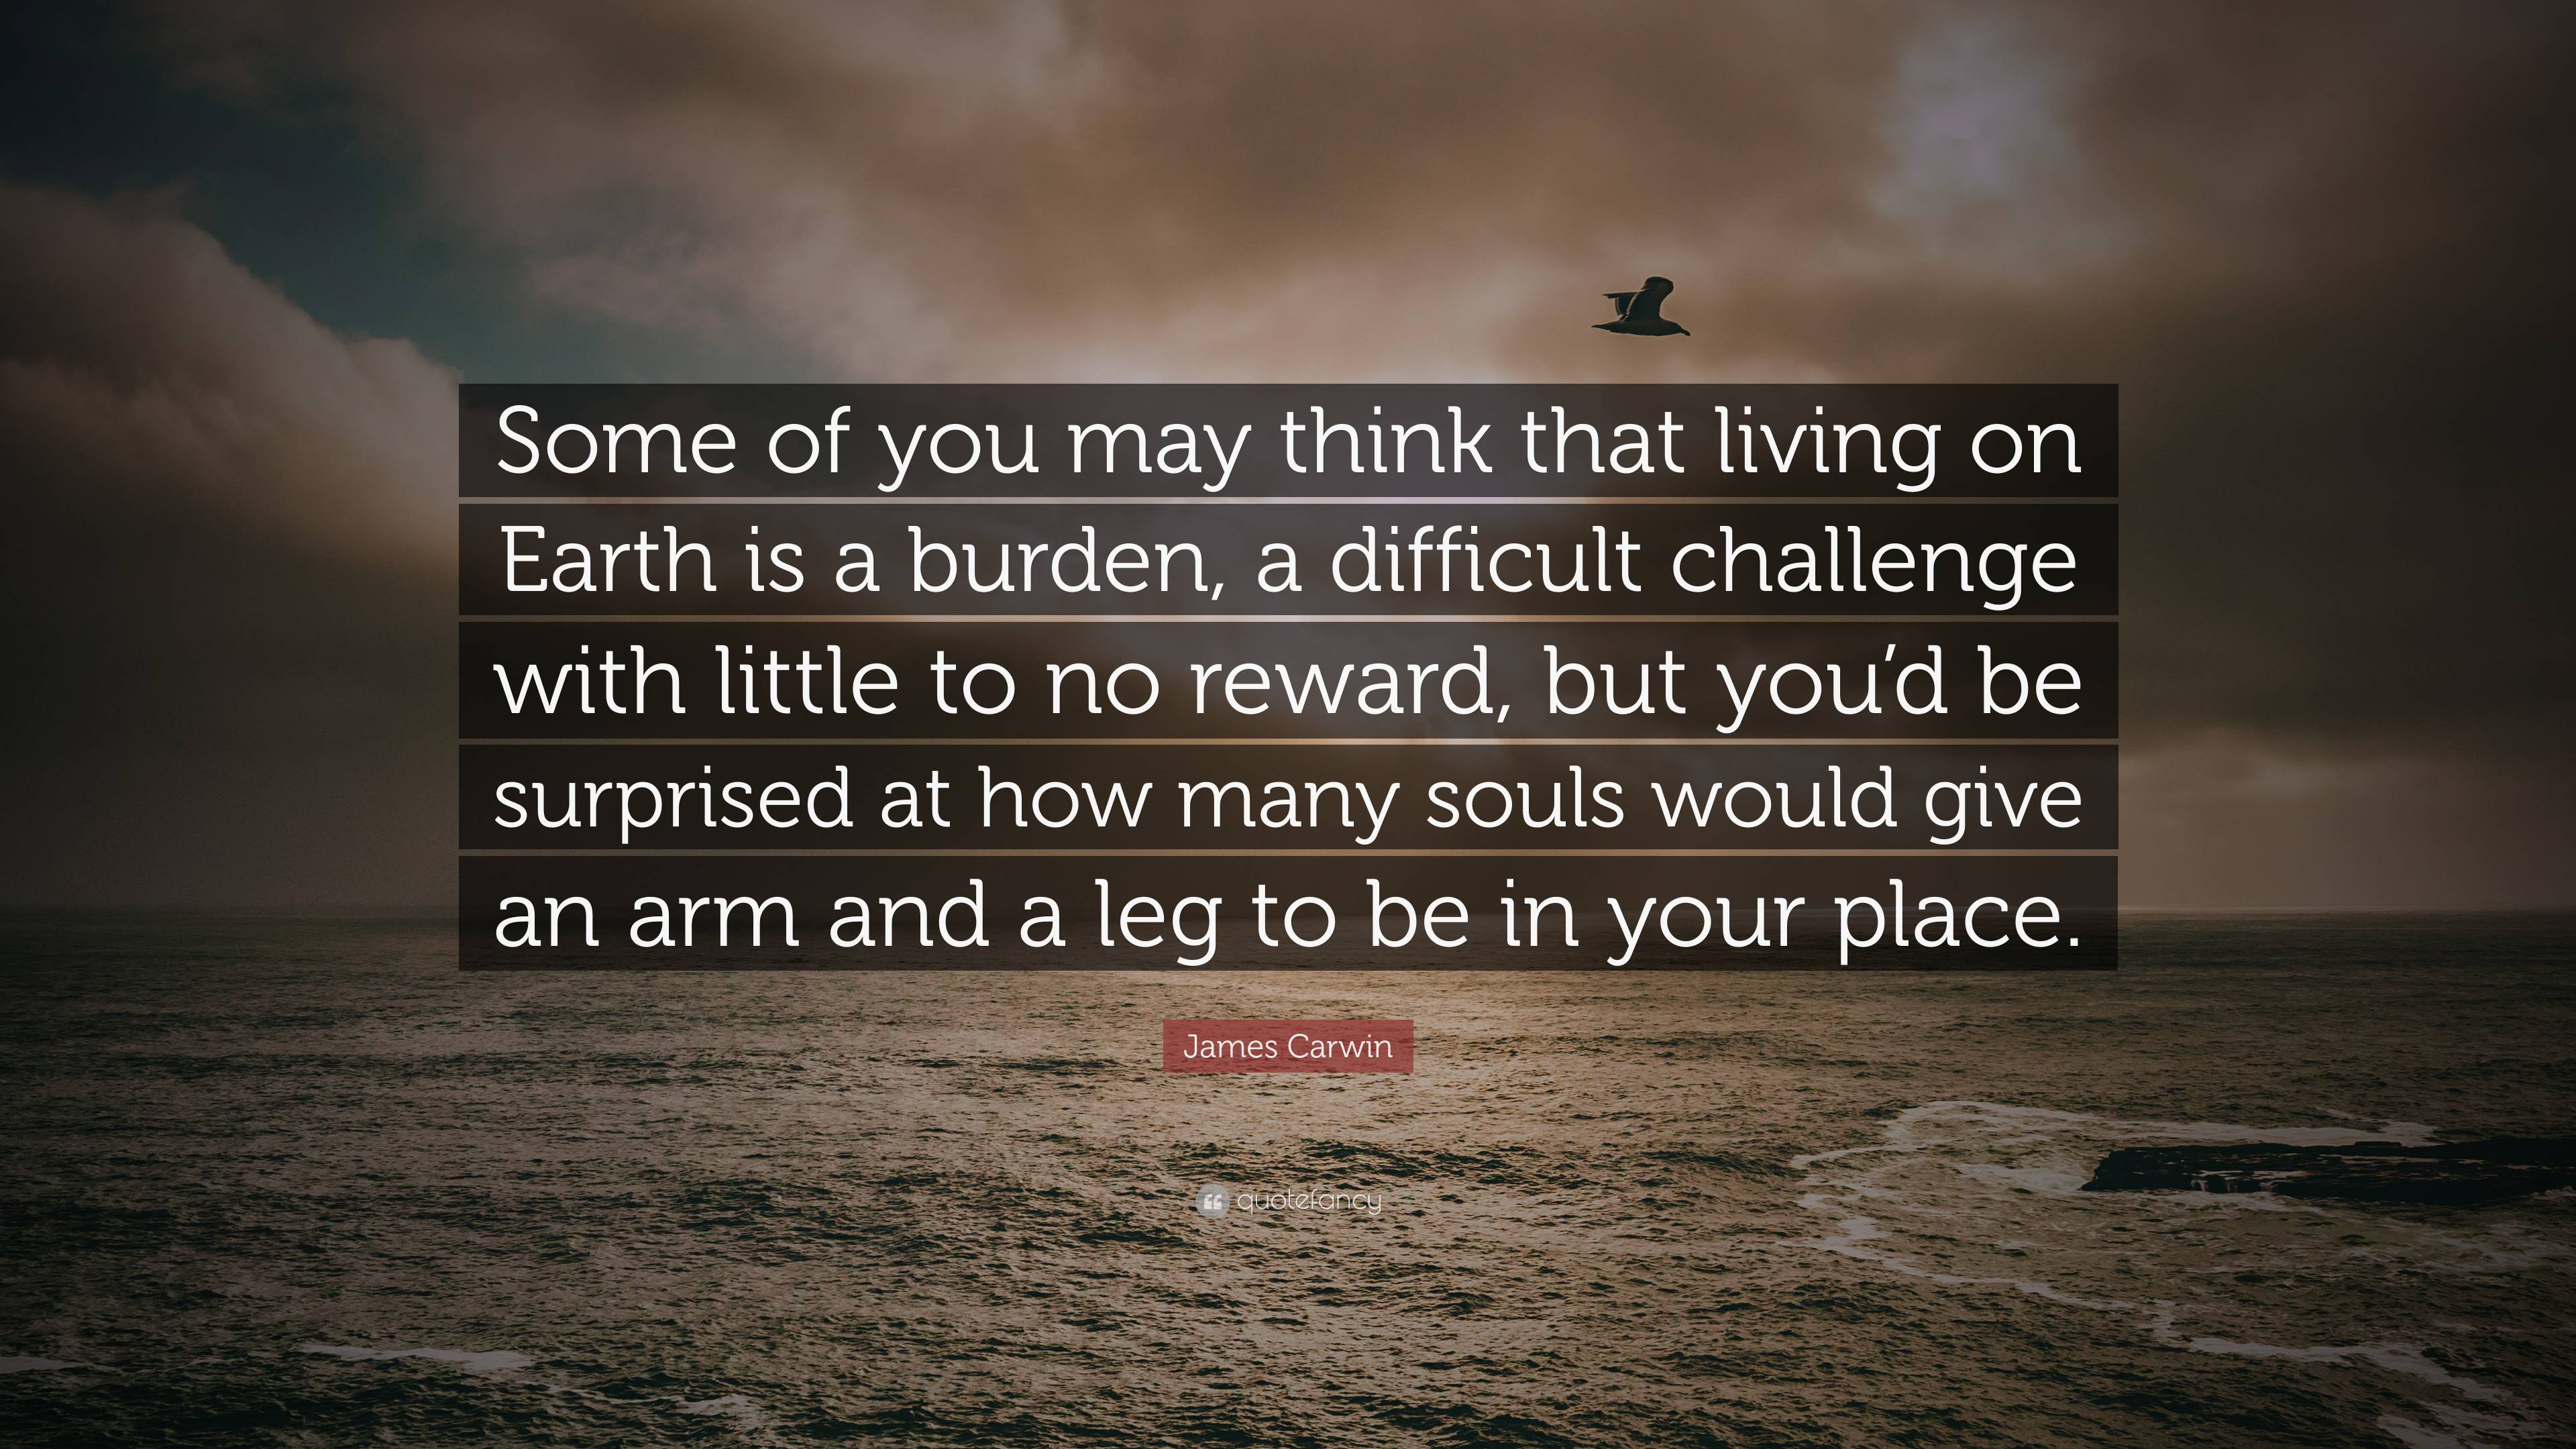 James Carwin Quote: “Some of you may think that living on Earth is a ...